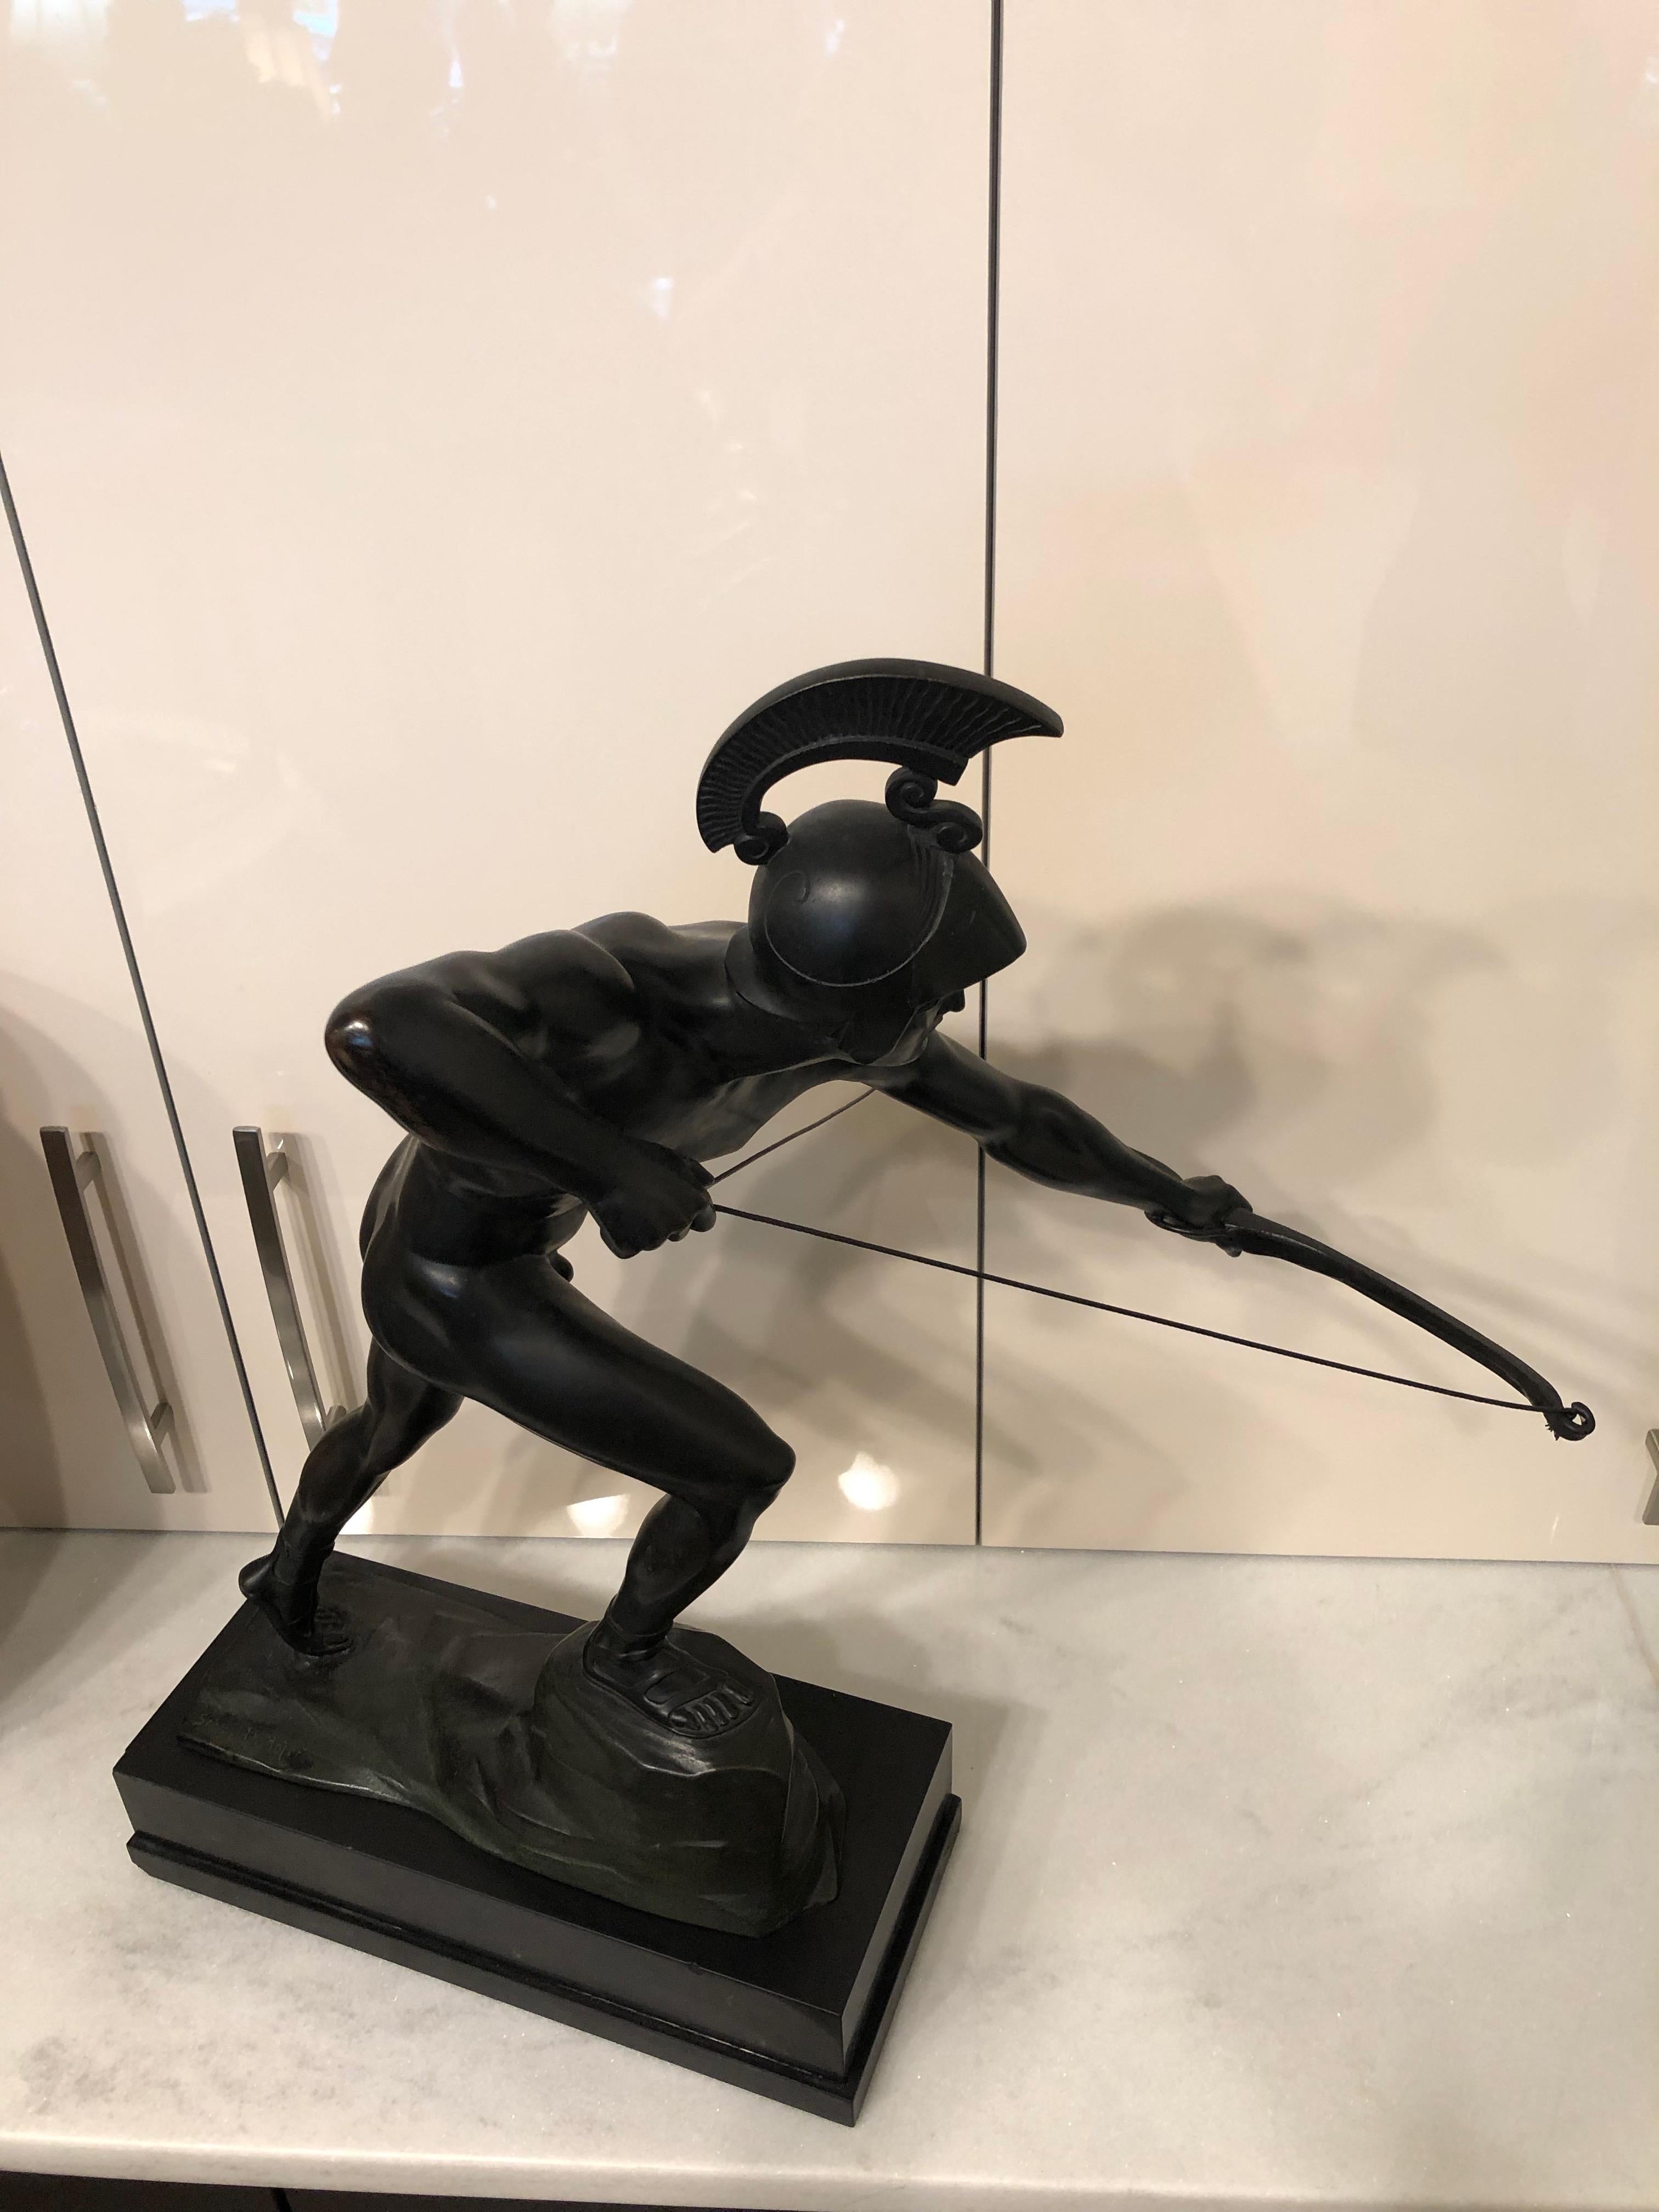 This sculpture in black is a Male Archer signed and mounted on black marble. Is an original Sculpture. Schmidt Hofer, (1873-1925).